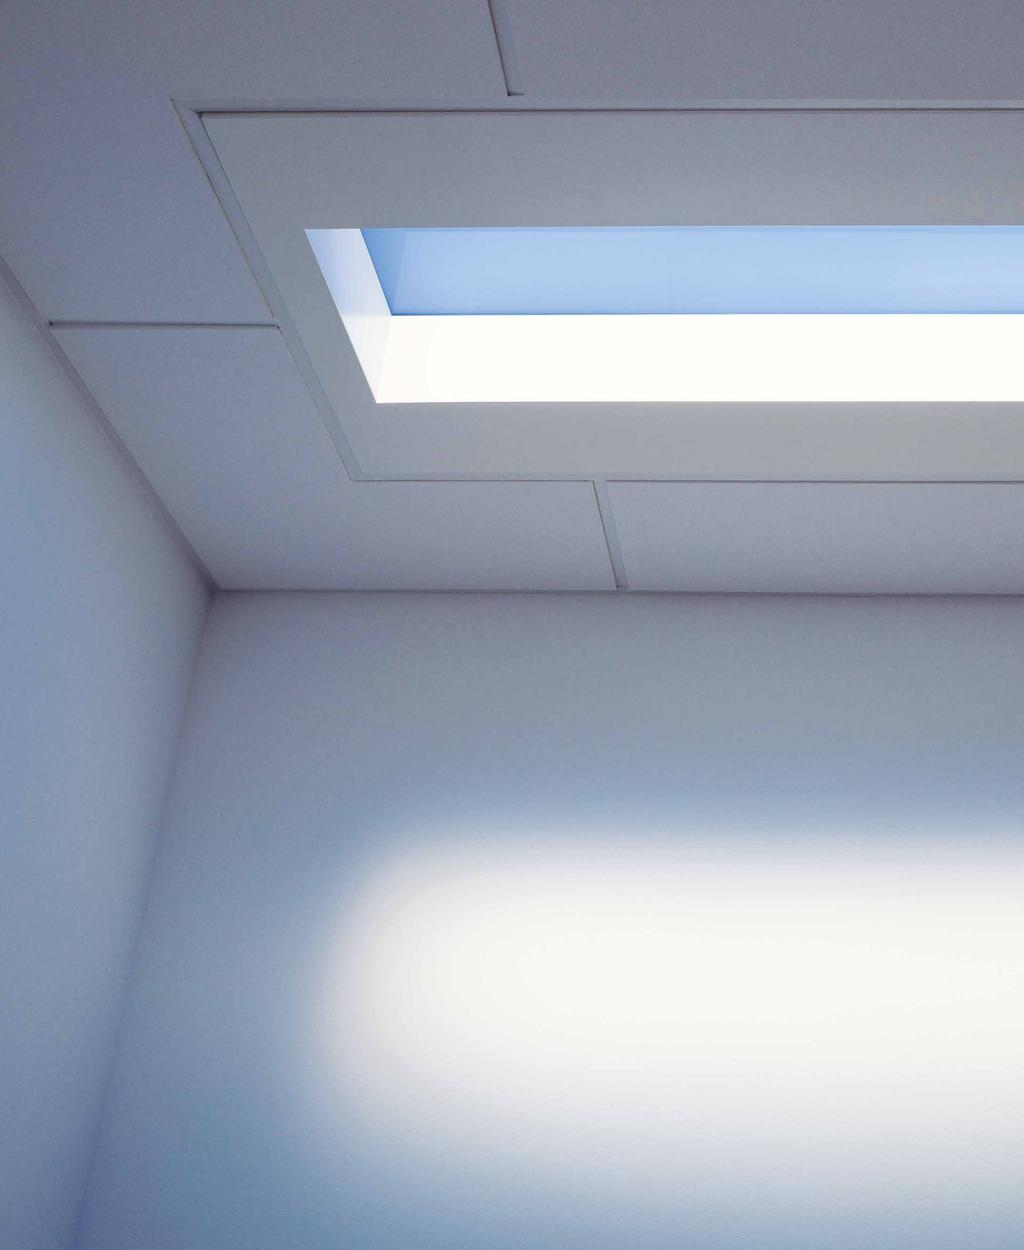 5 CoeLux LS MATTE Datasheet CoeLux LS MATTE can be installed as a single unit, as a modular system, or aligned in order to design hallways of light able to deliver depth or visual patterns.